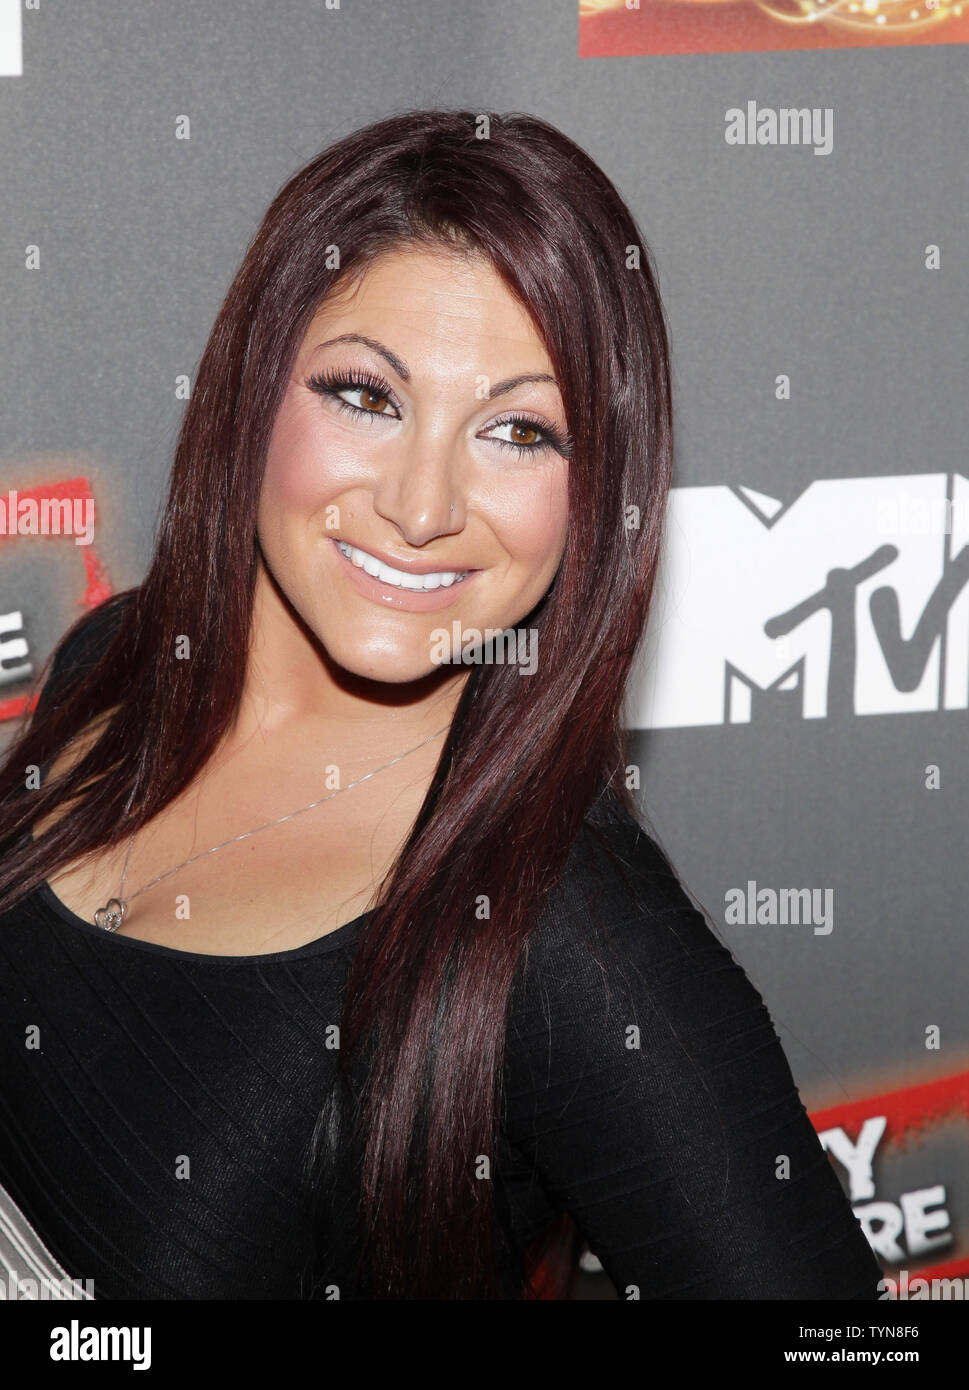 Deena Nicole Cortese arrives on the red carpet for the 'Jersey Shore' Final Season Premiere at Bagatelle in New York City on October 4, 2012.       UPI/John Angelillo Stock Photo